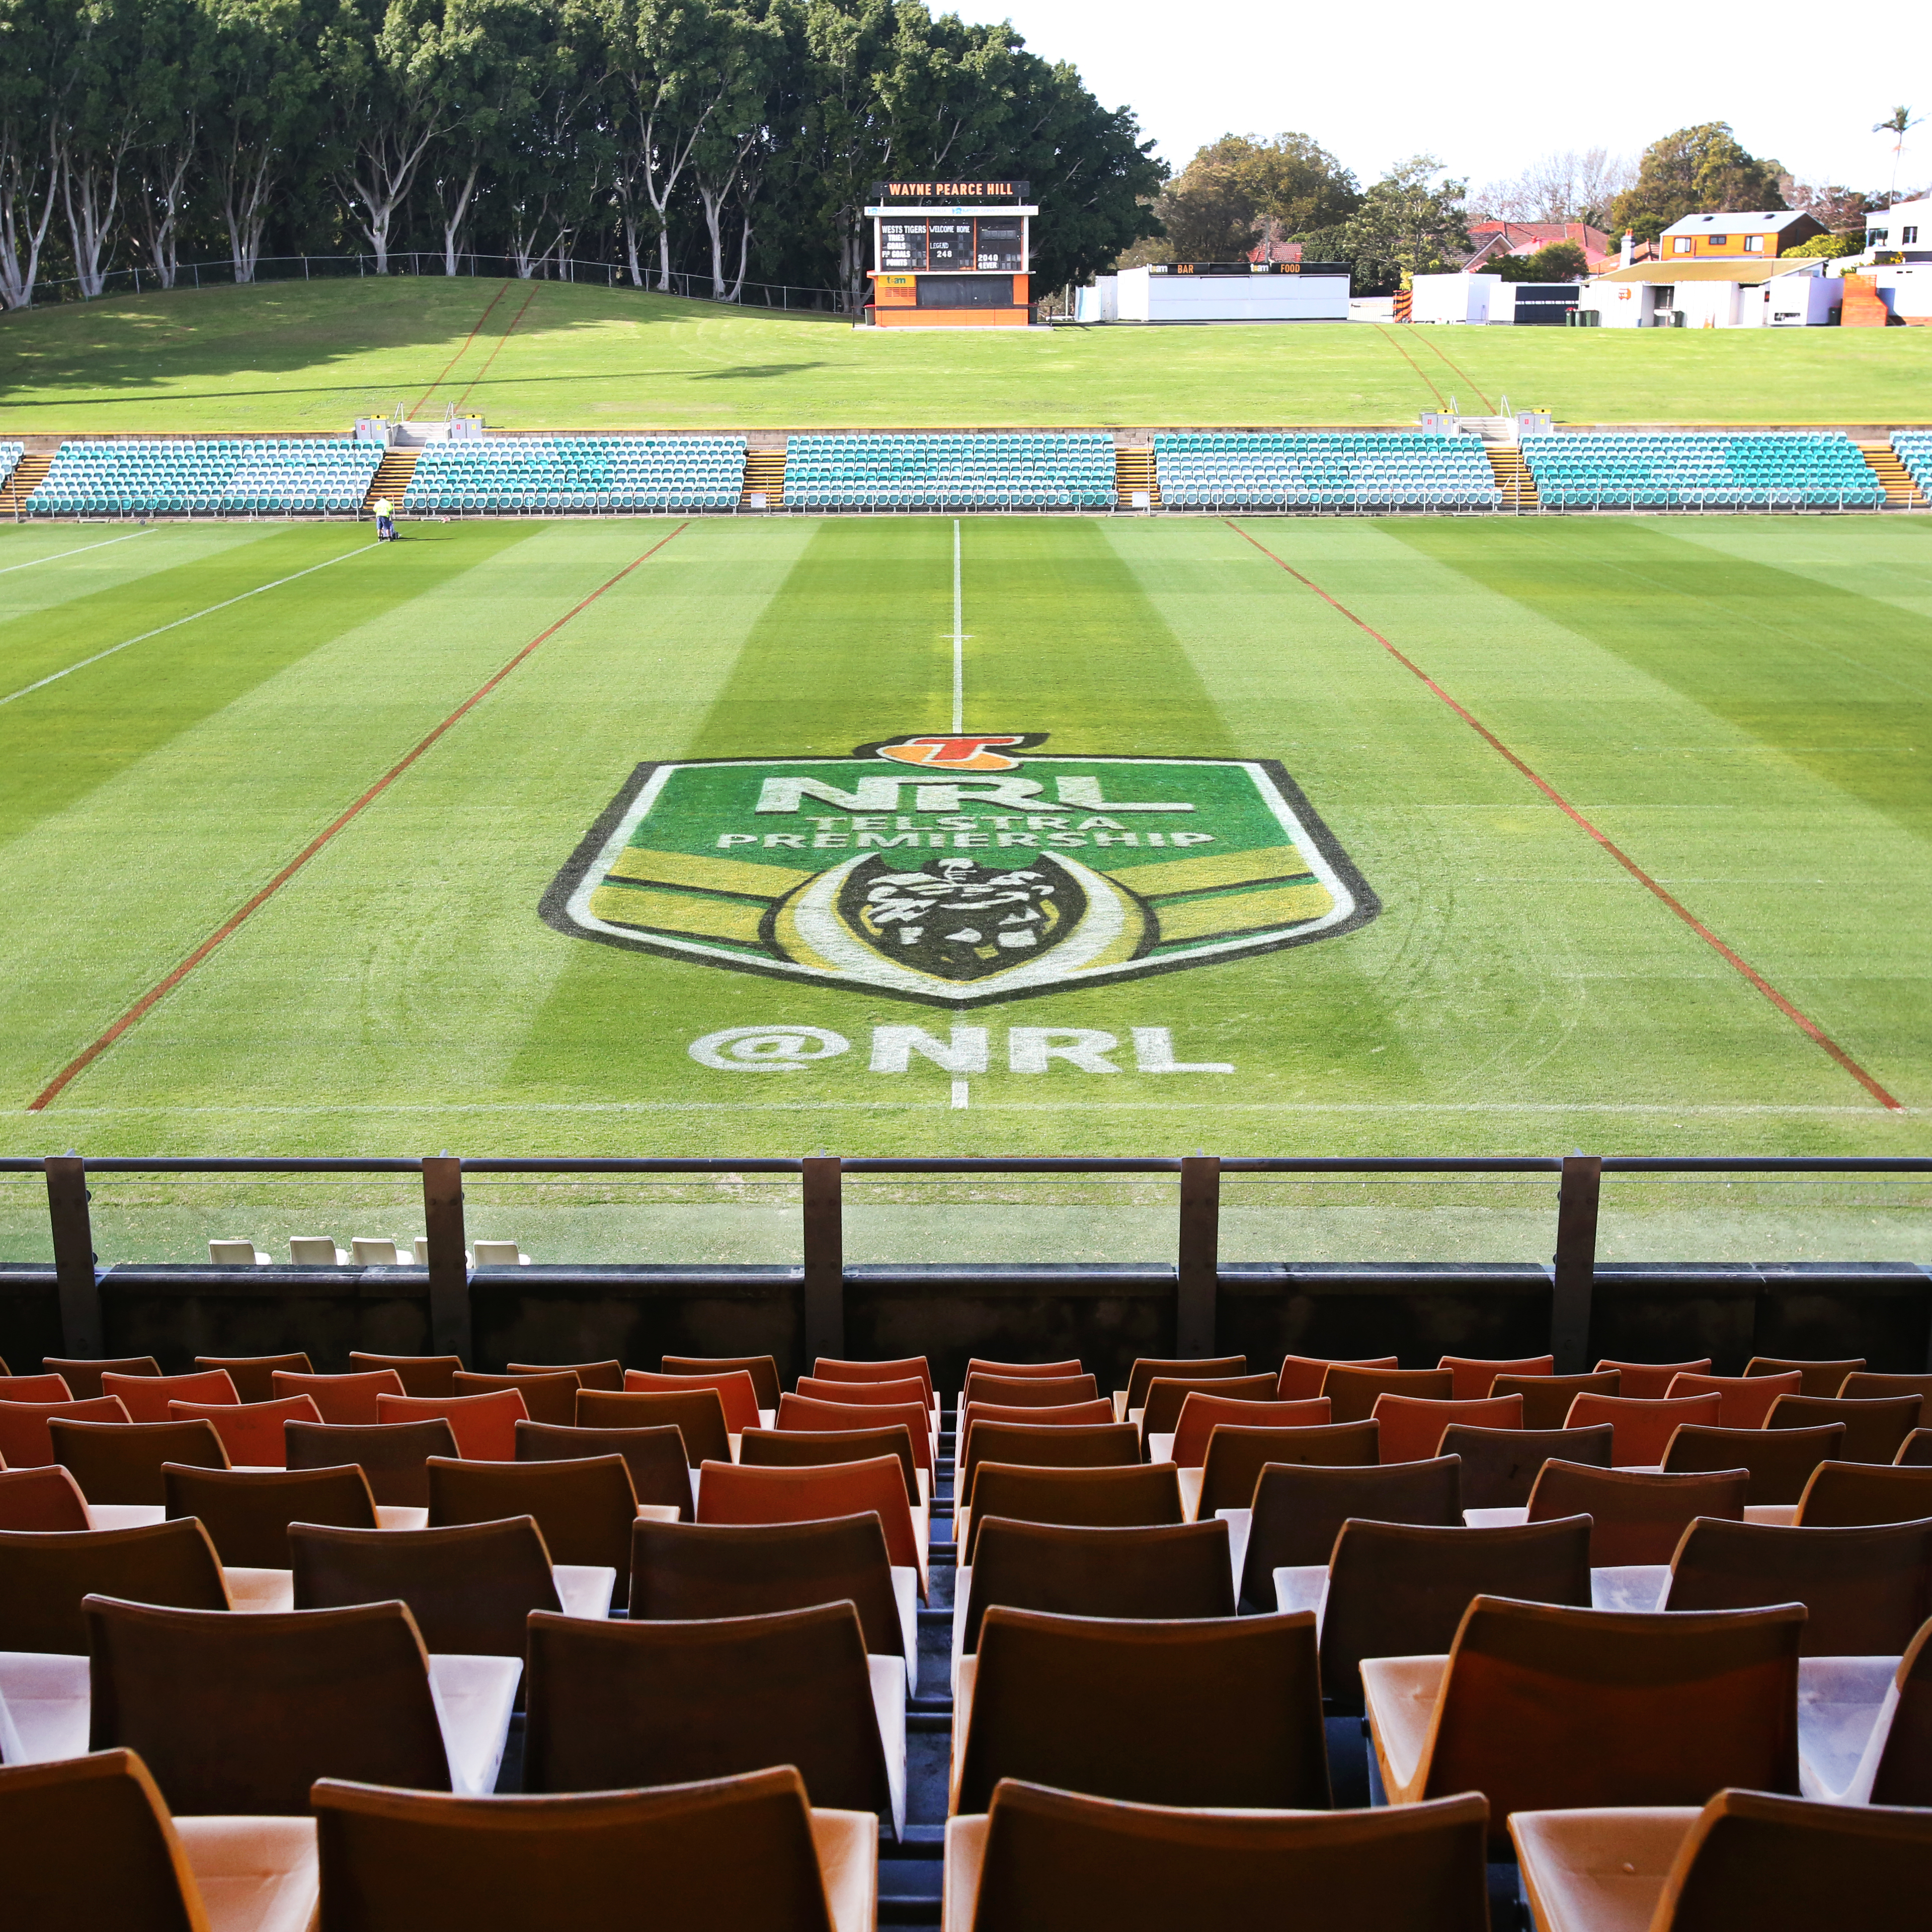  Leichhardt Oval NRL sign on pitch